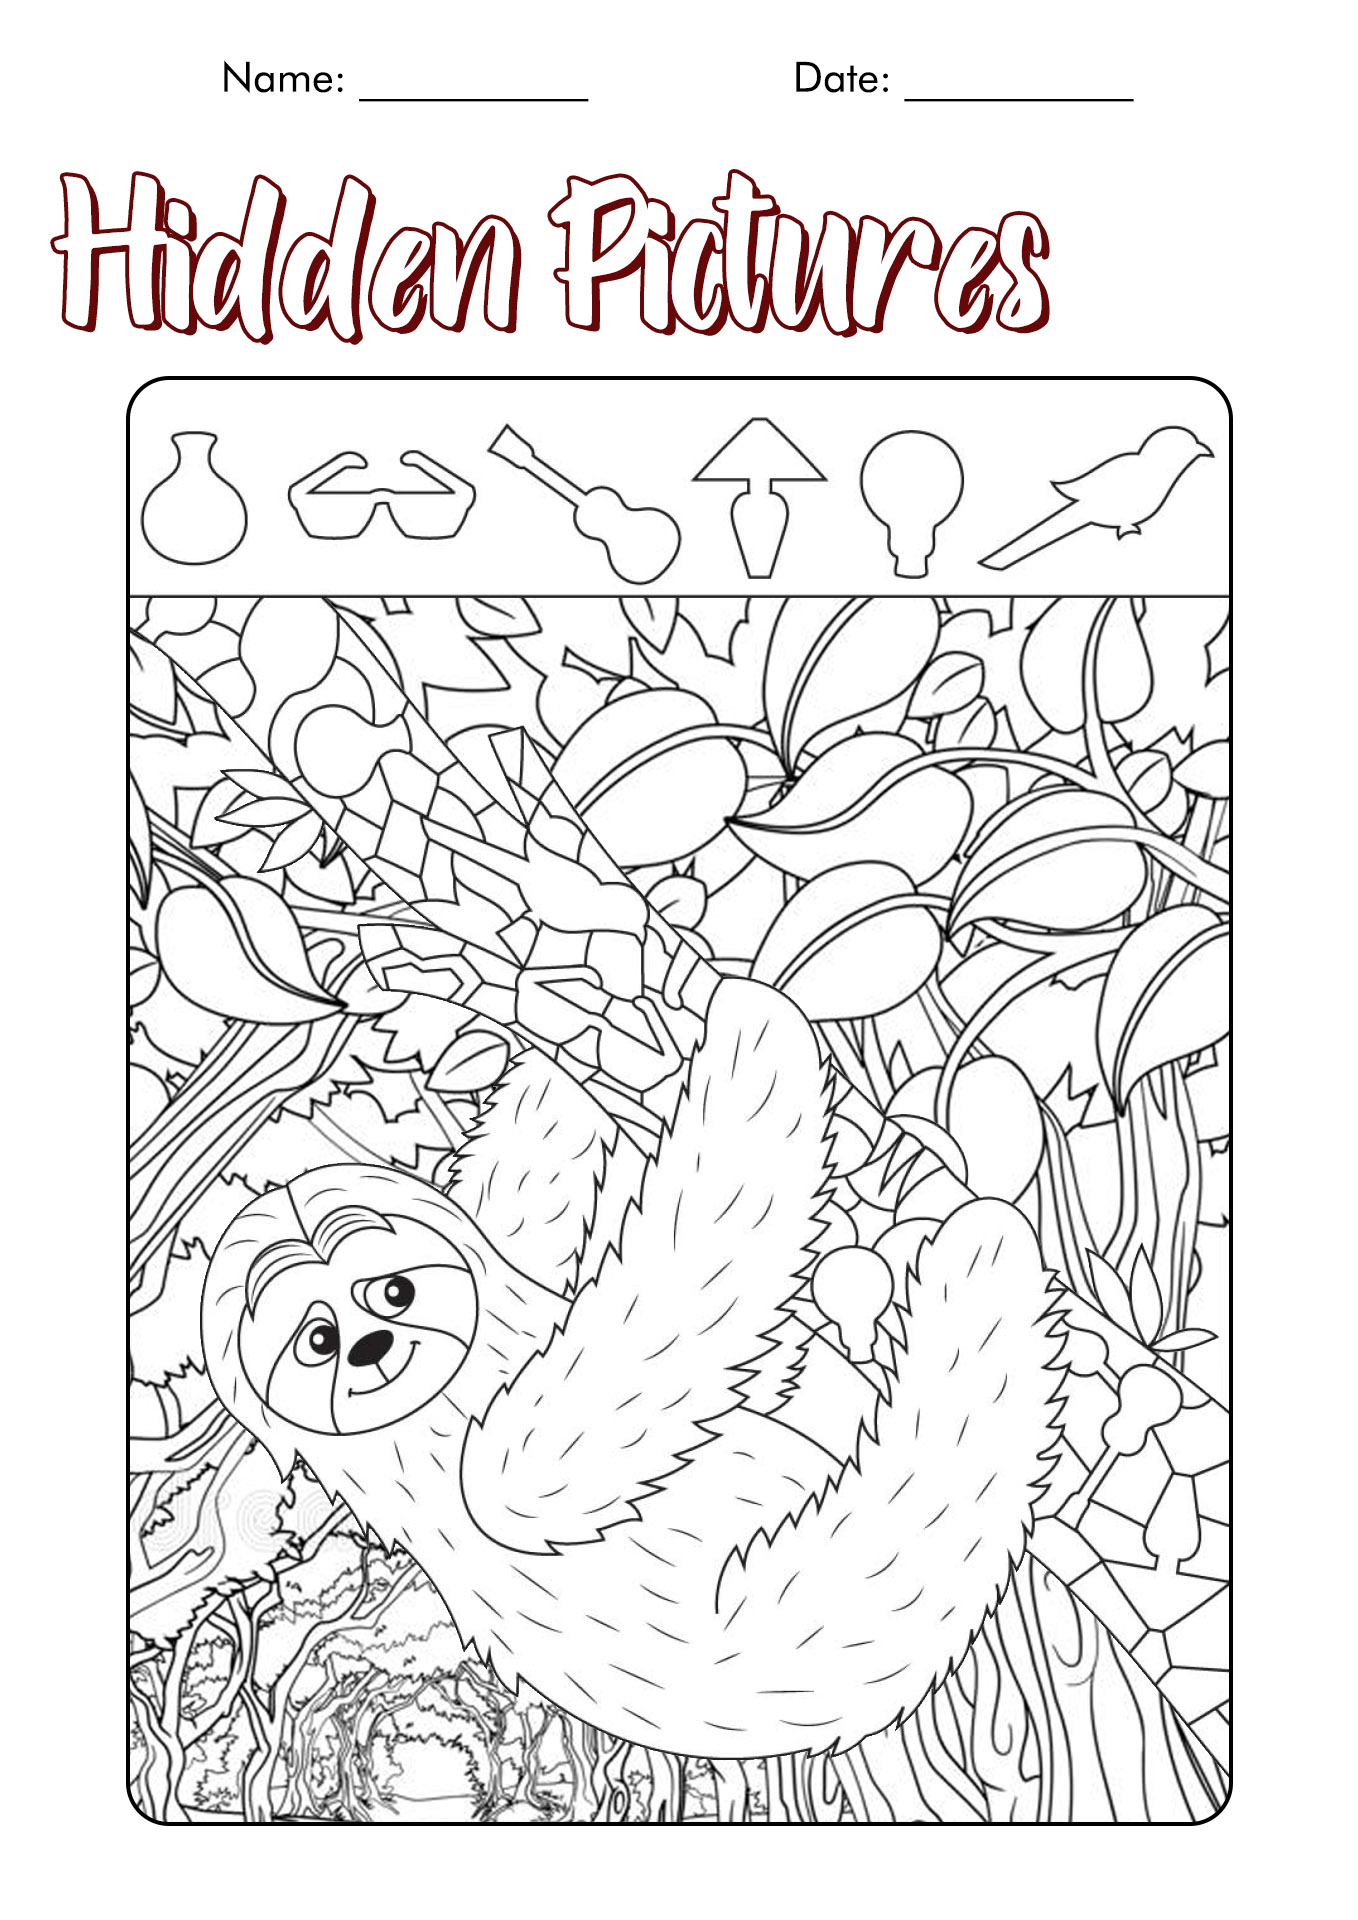 15 Best Images Of I Spy Worksheets Difficult I Spy Coloring Pages For Kids Free Hidden Object 